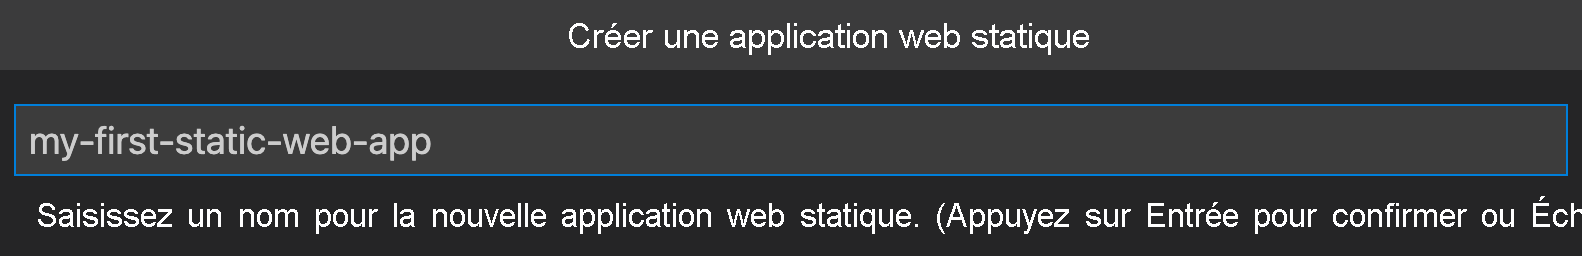 Screenshot showing how to create a Static Web App.